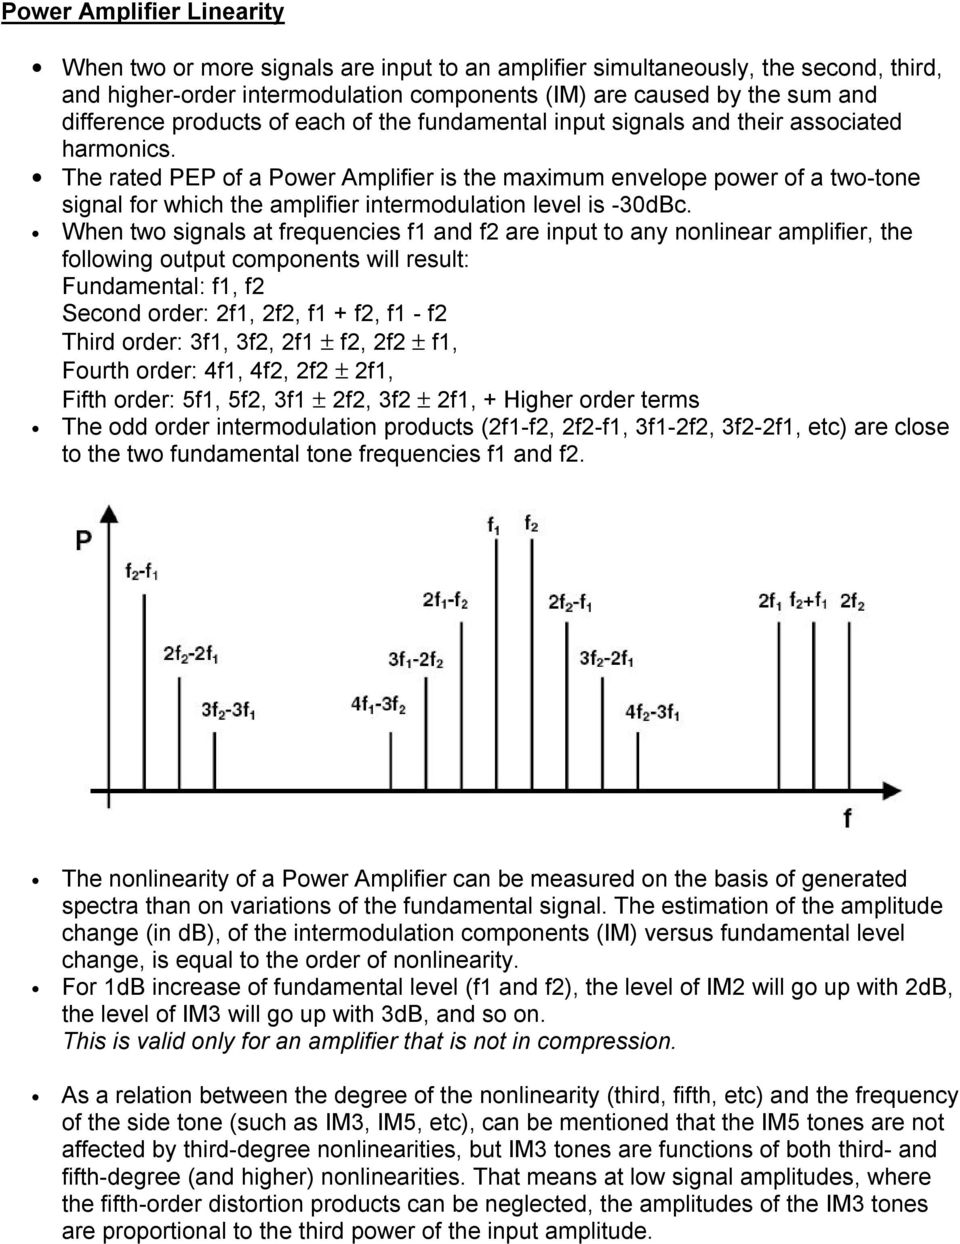 The rated PEP of a Power Amplifier is the maximum envelope power of a two-tone signal for which the amplifier intermodulation level is -30dBc.